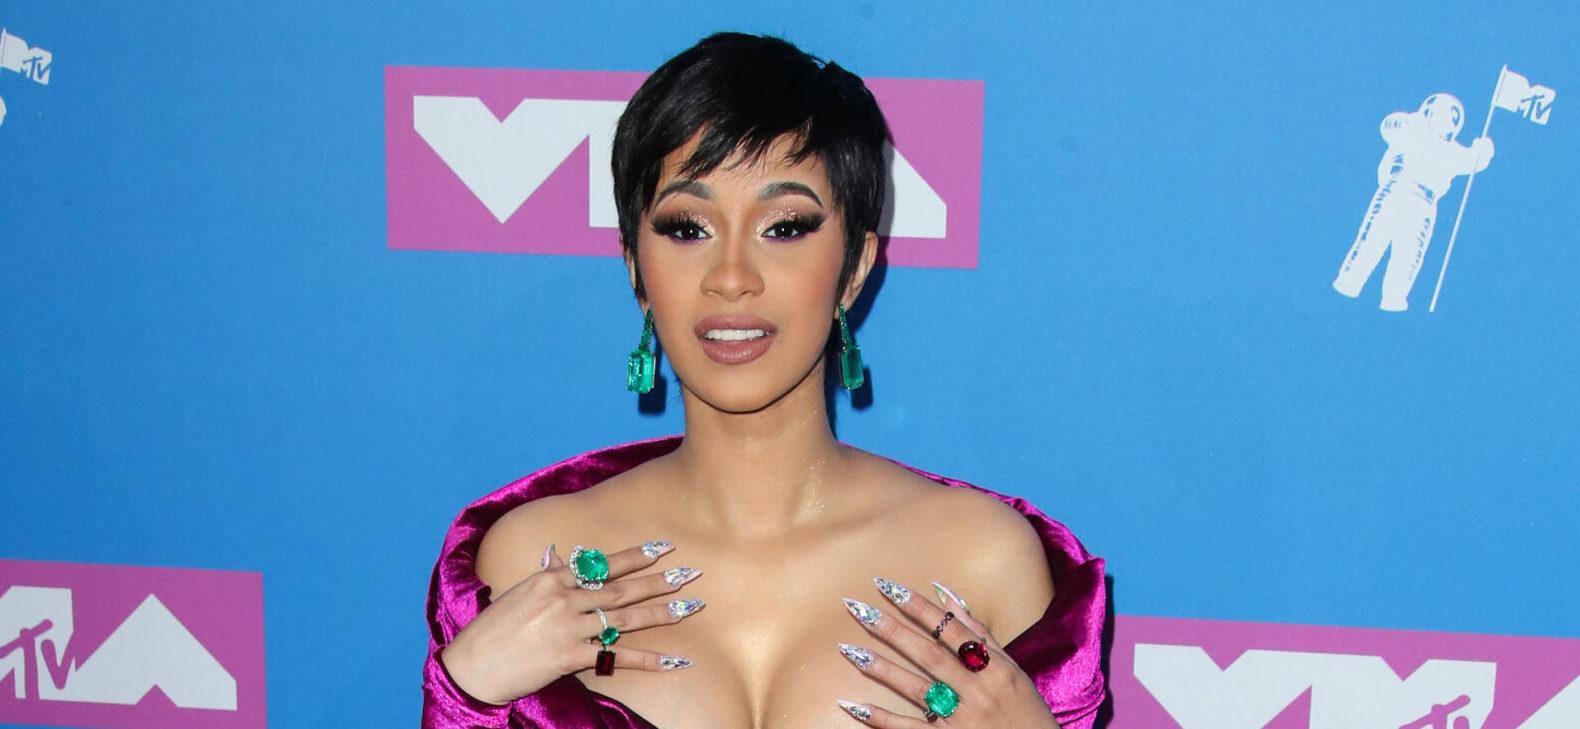 Fans React To Cardi B’s Playboy Announcement